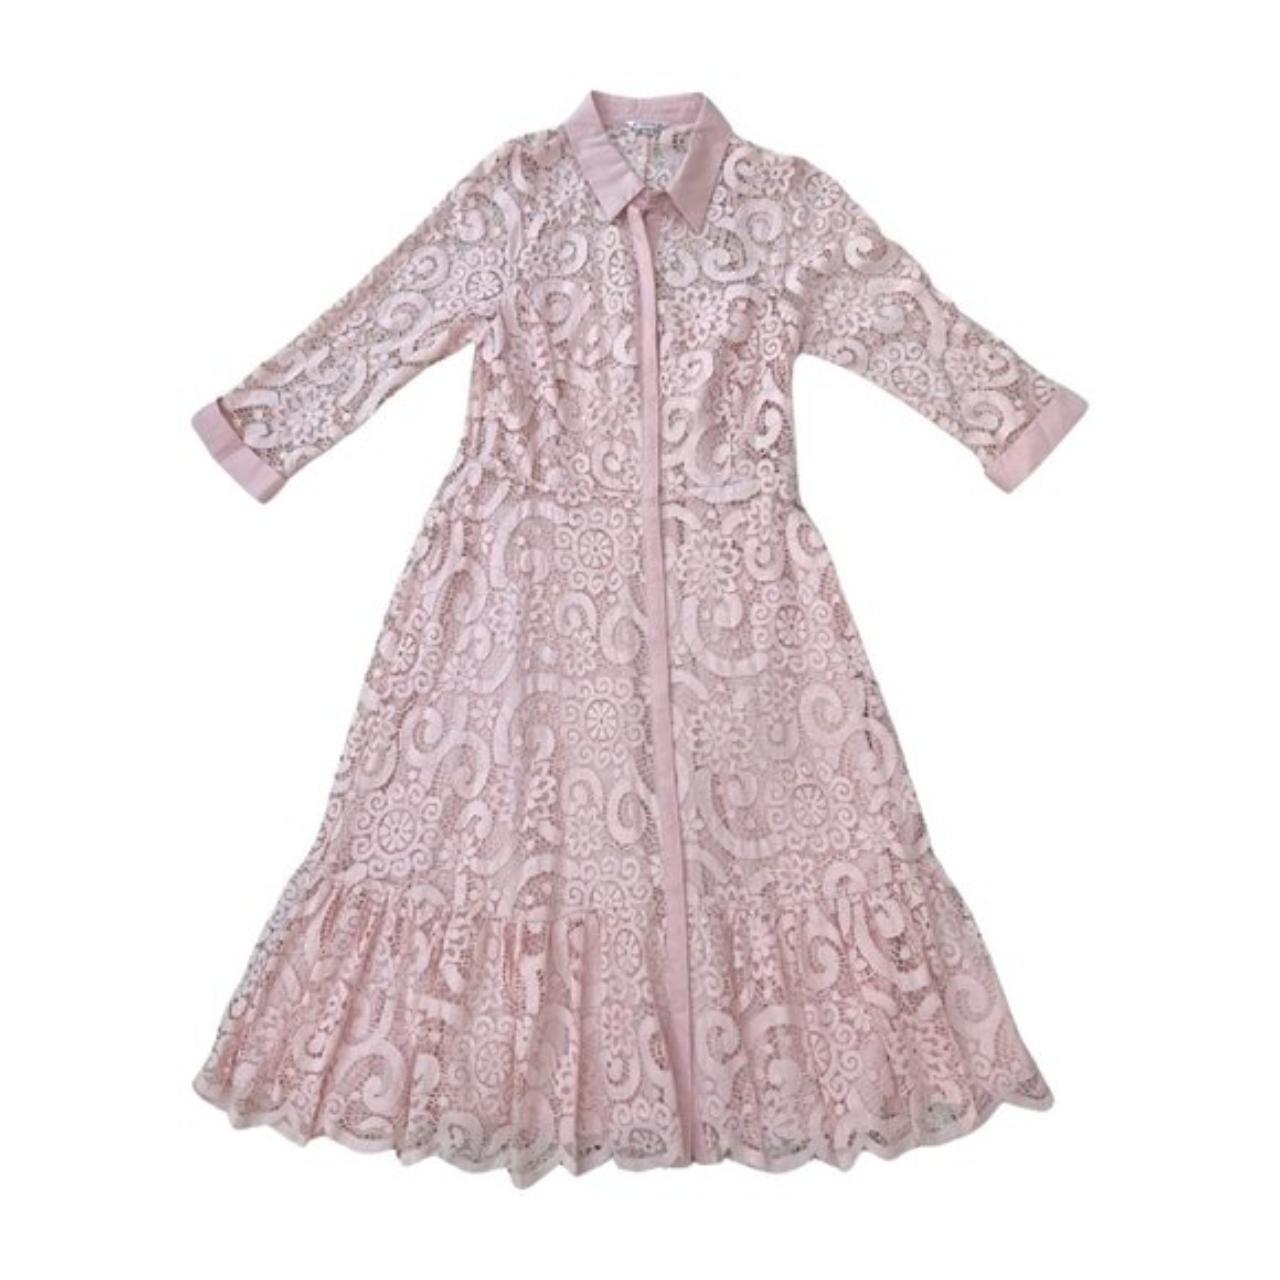 Nanette Lepore 3/4 Sleeve Lace Shirt Dress in Pink